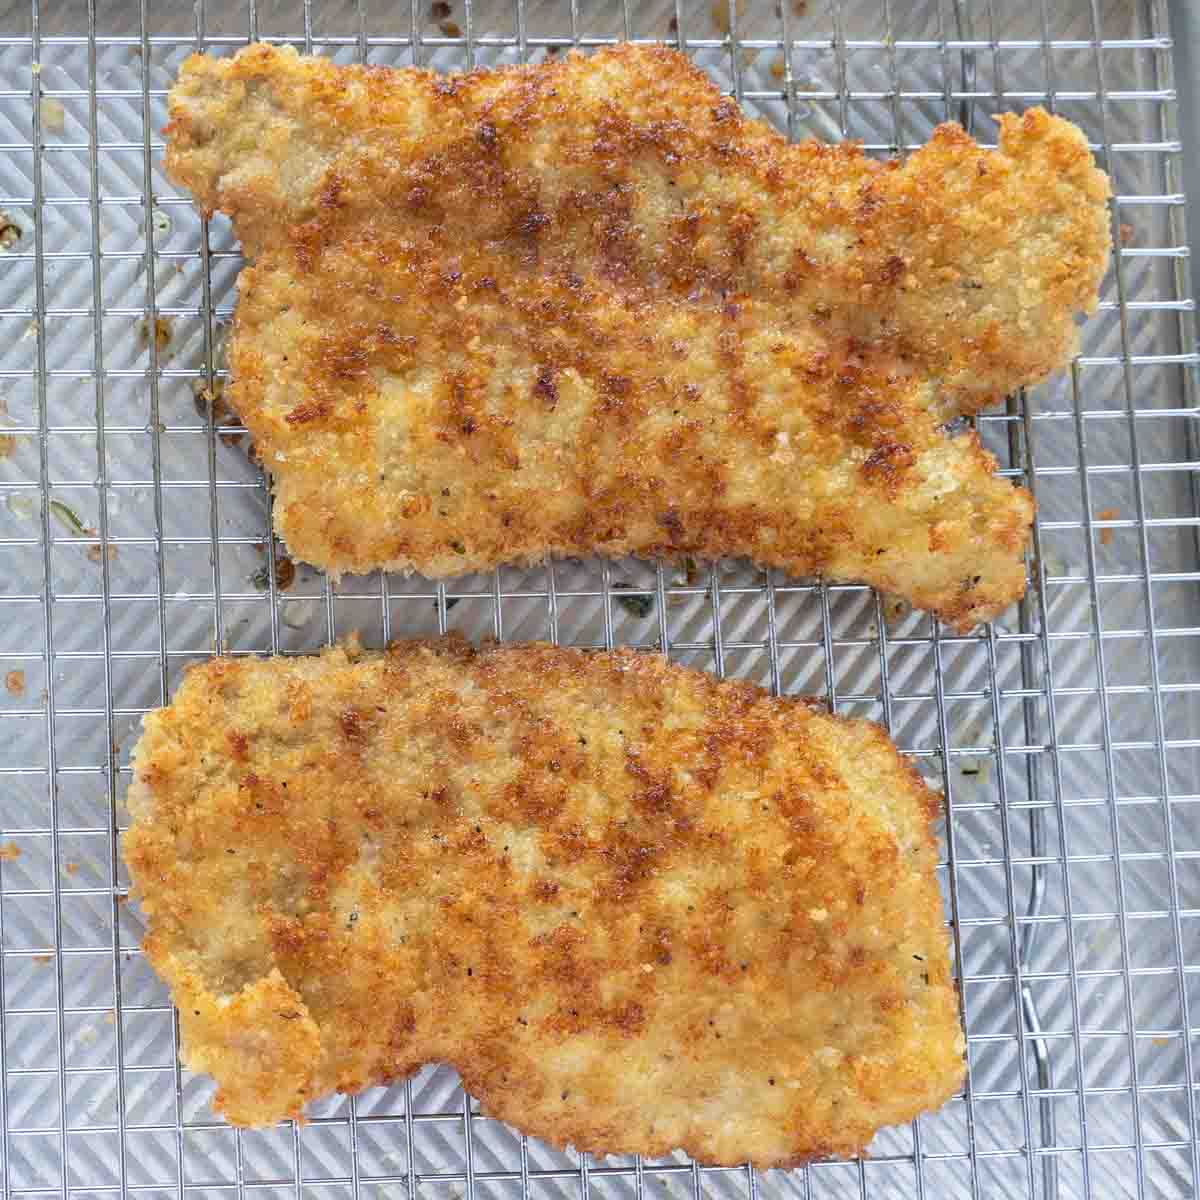 fried cutlets draining on wire rack.